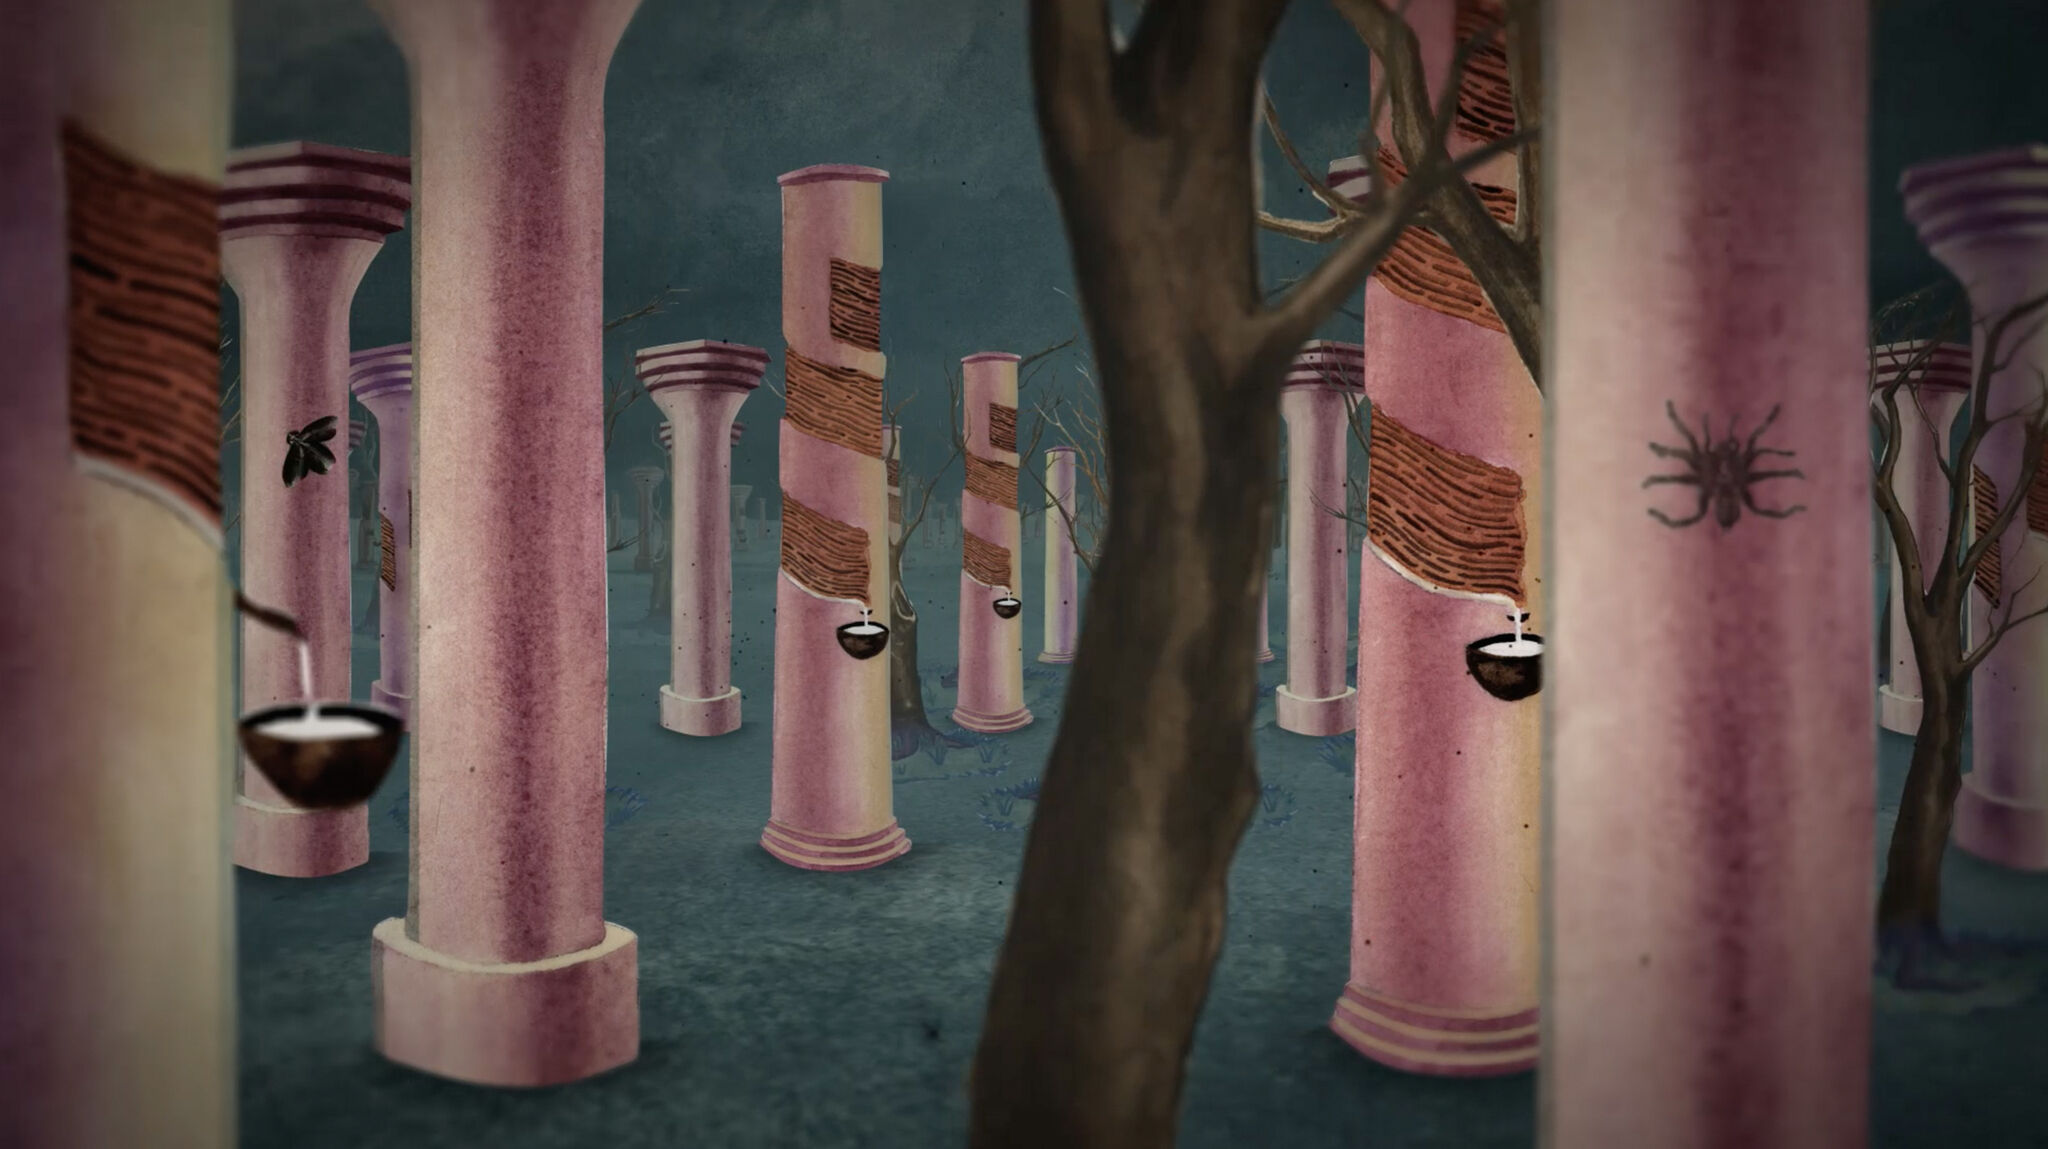 A series of pink columns, interspersed with leafless trees, against a smoky, bluish-gray background. Some of the columns appear to have been tapped for sap as though they were trees. A spider and a fly have lighted on two of the columns.